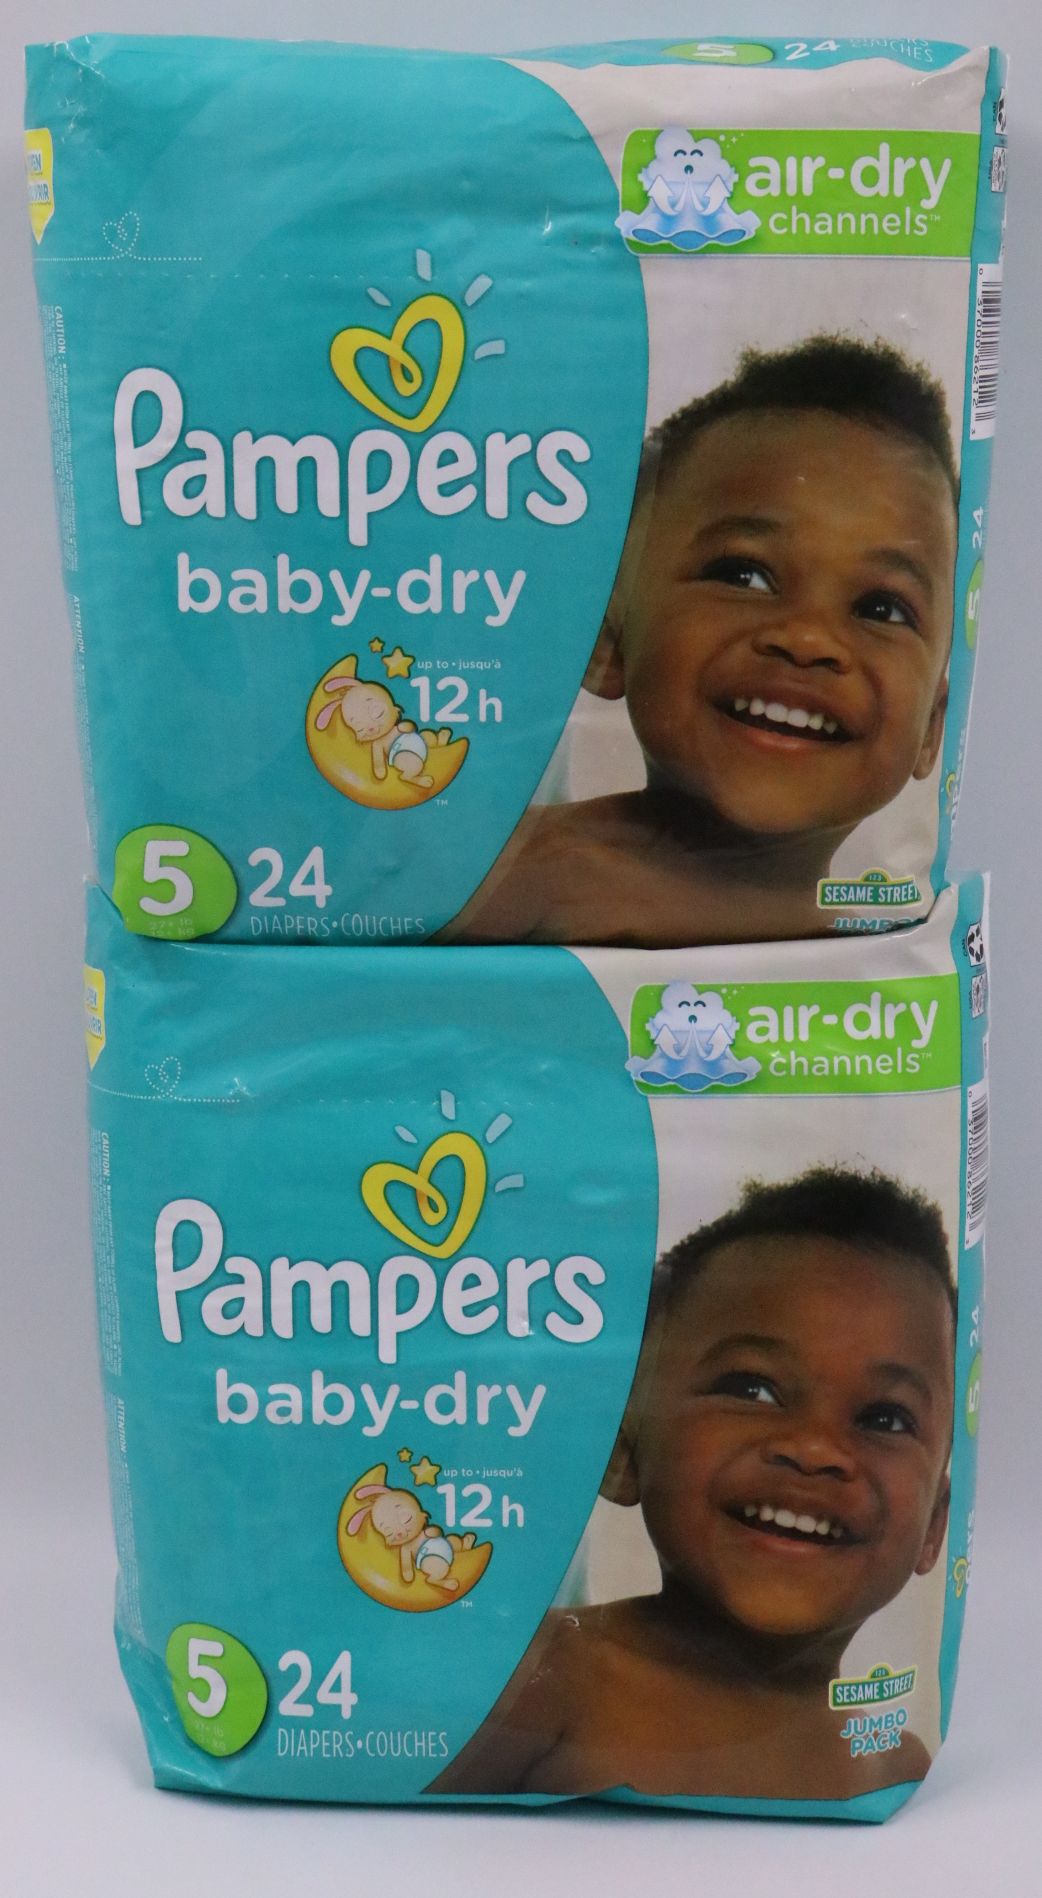 pampers size 2 jumbo pack offers